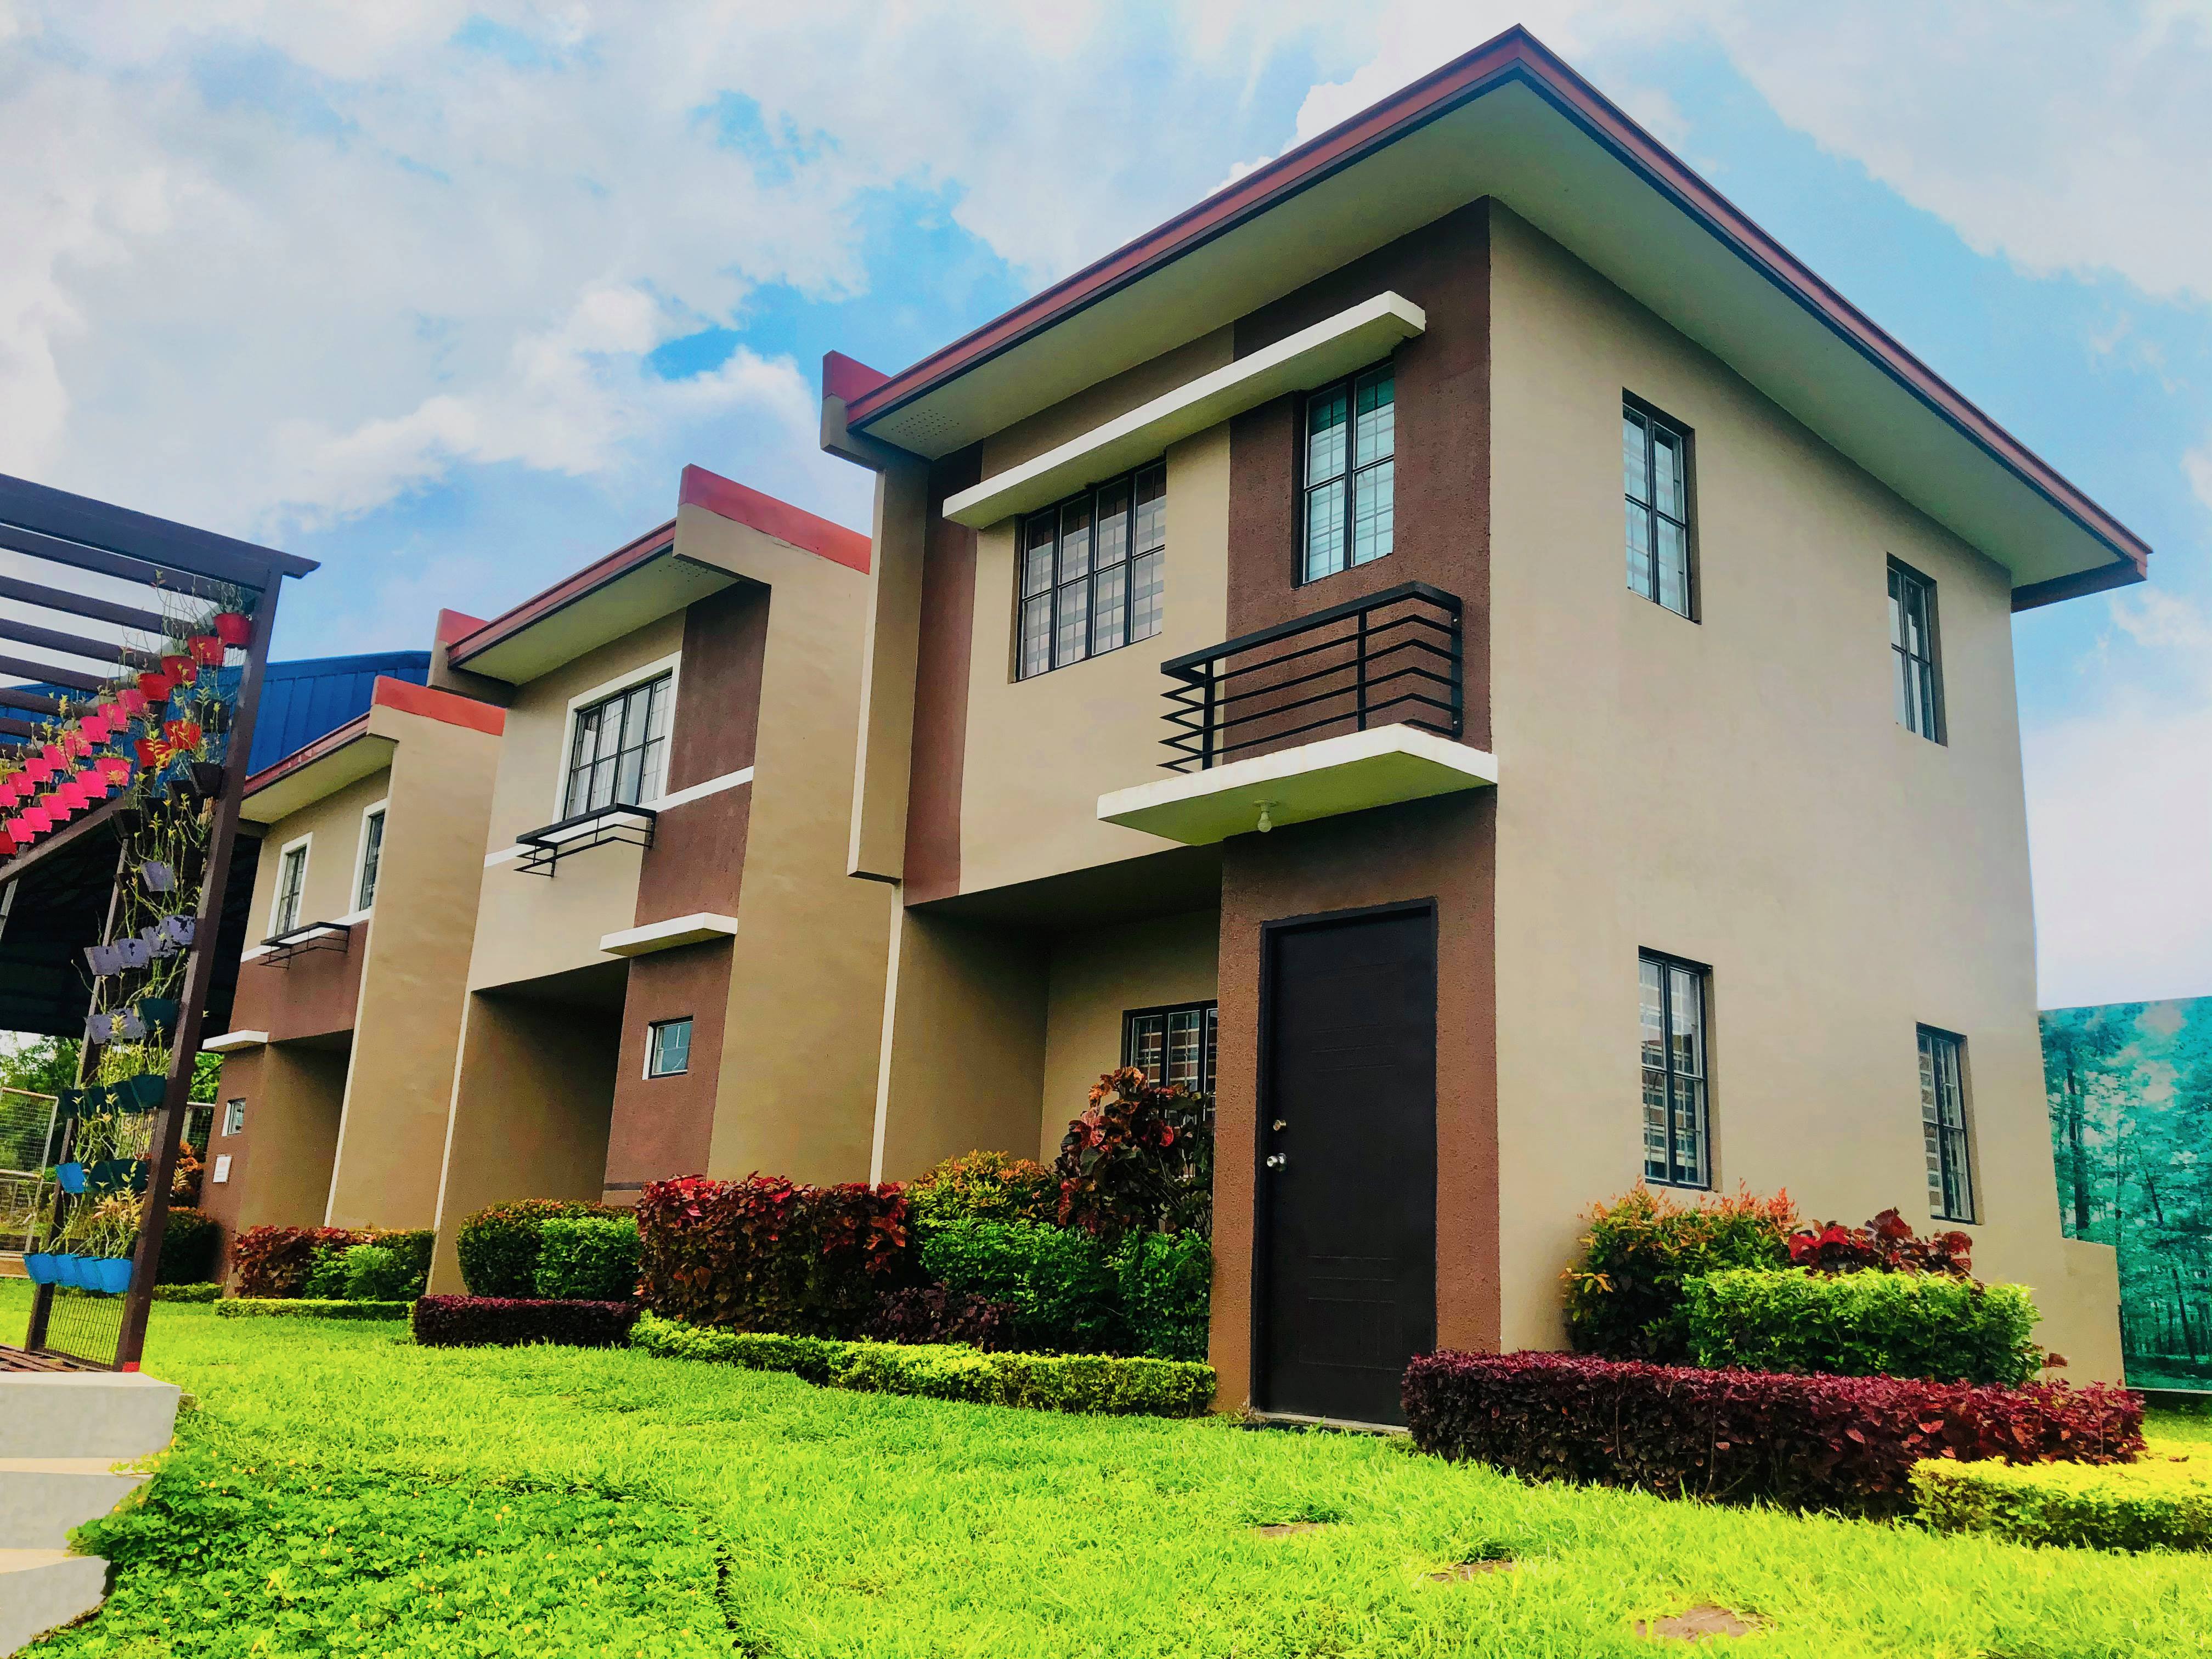 Lumina Homes to develop another big project in Sto. Tomas, Batangas